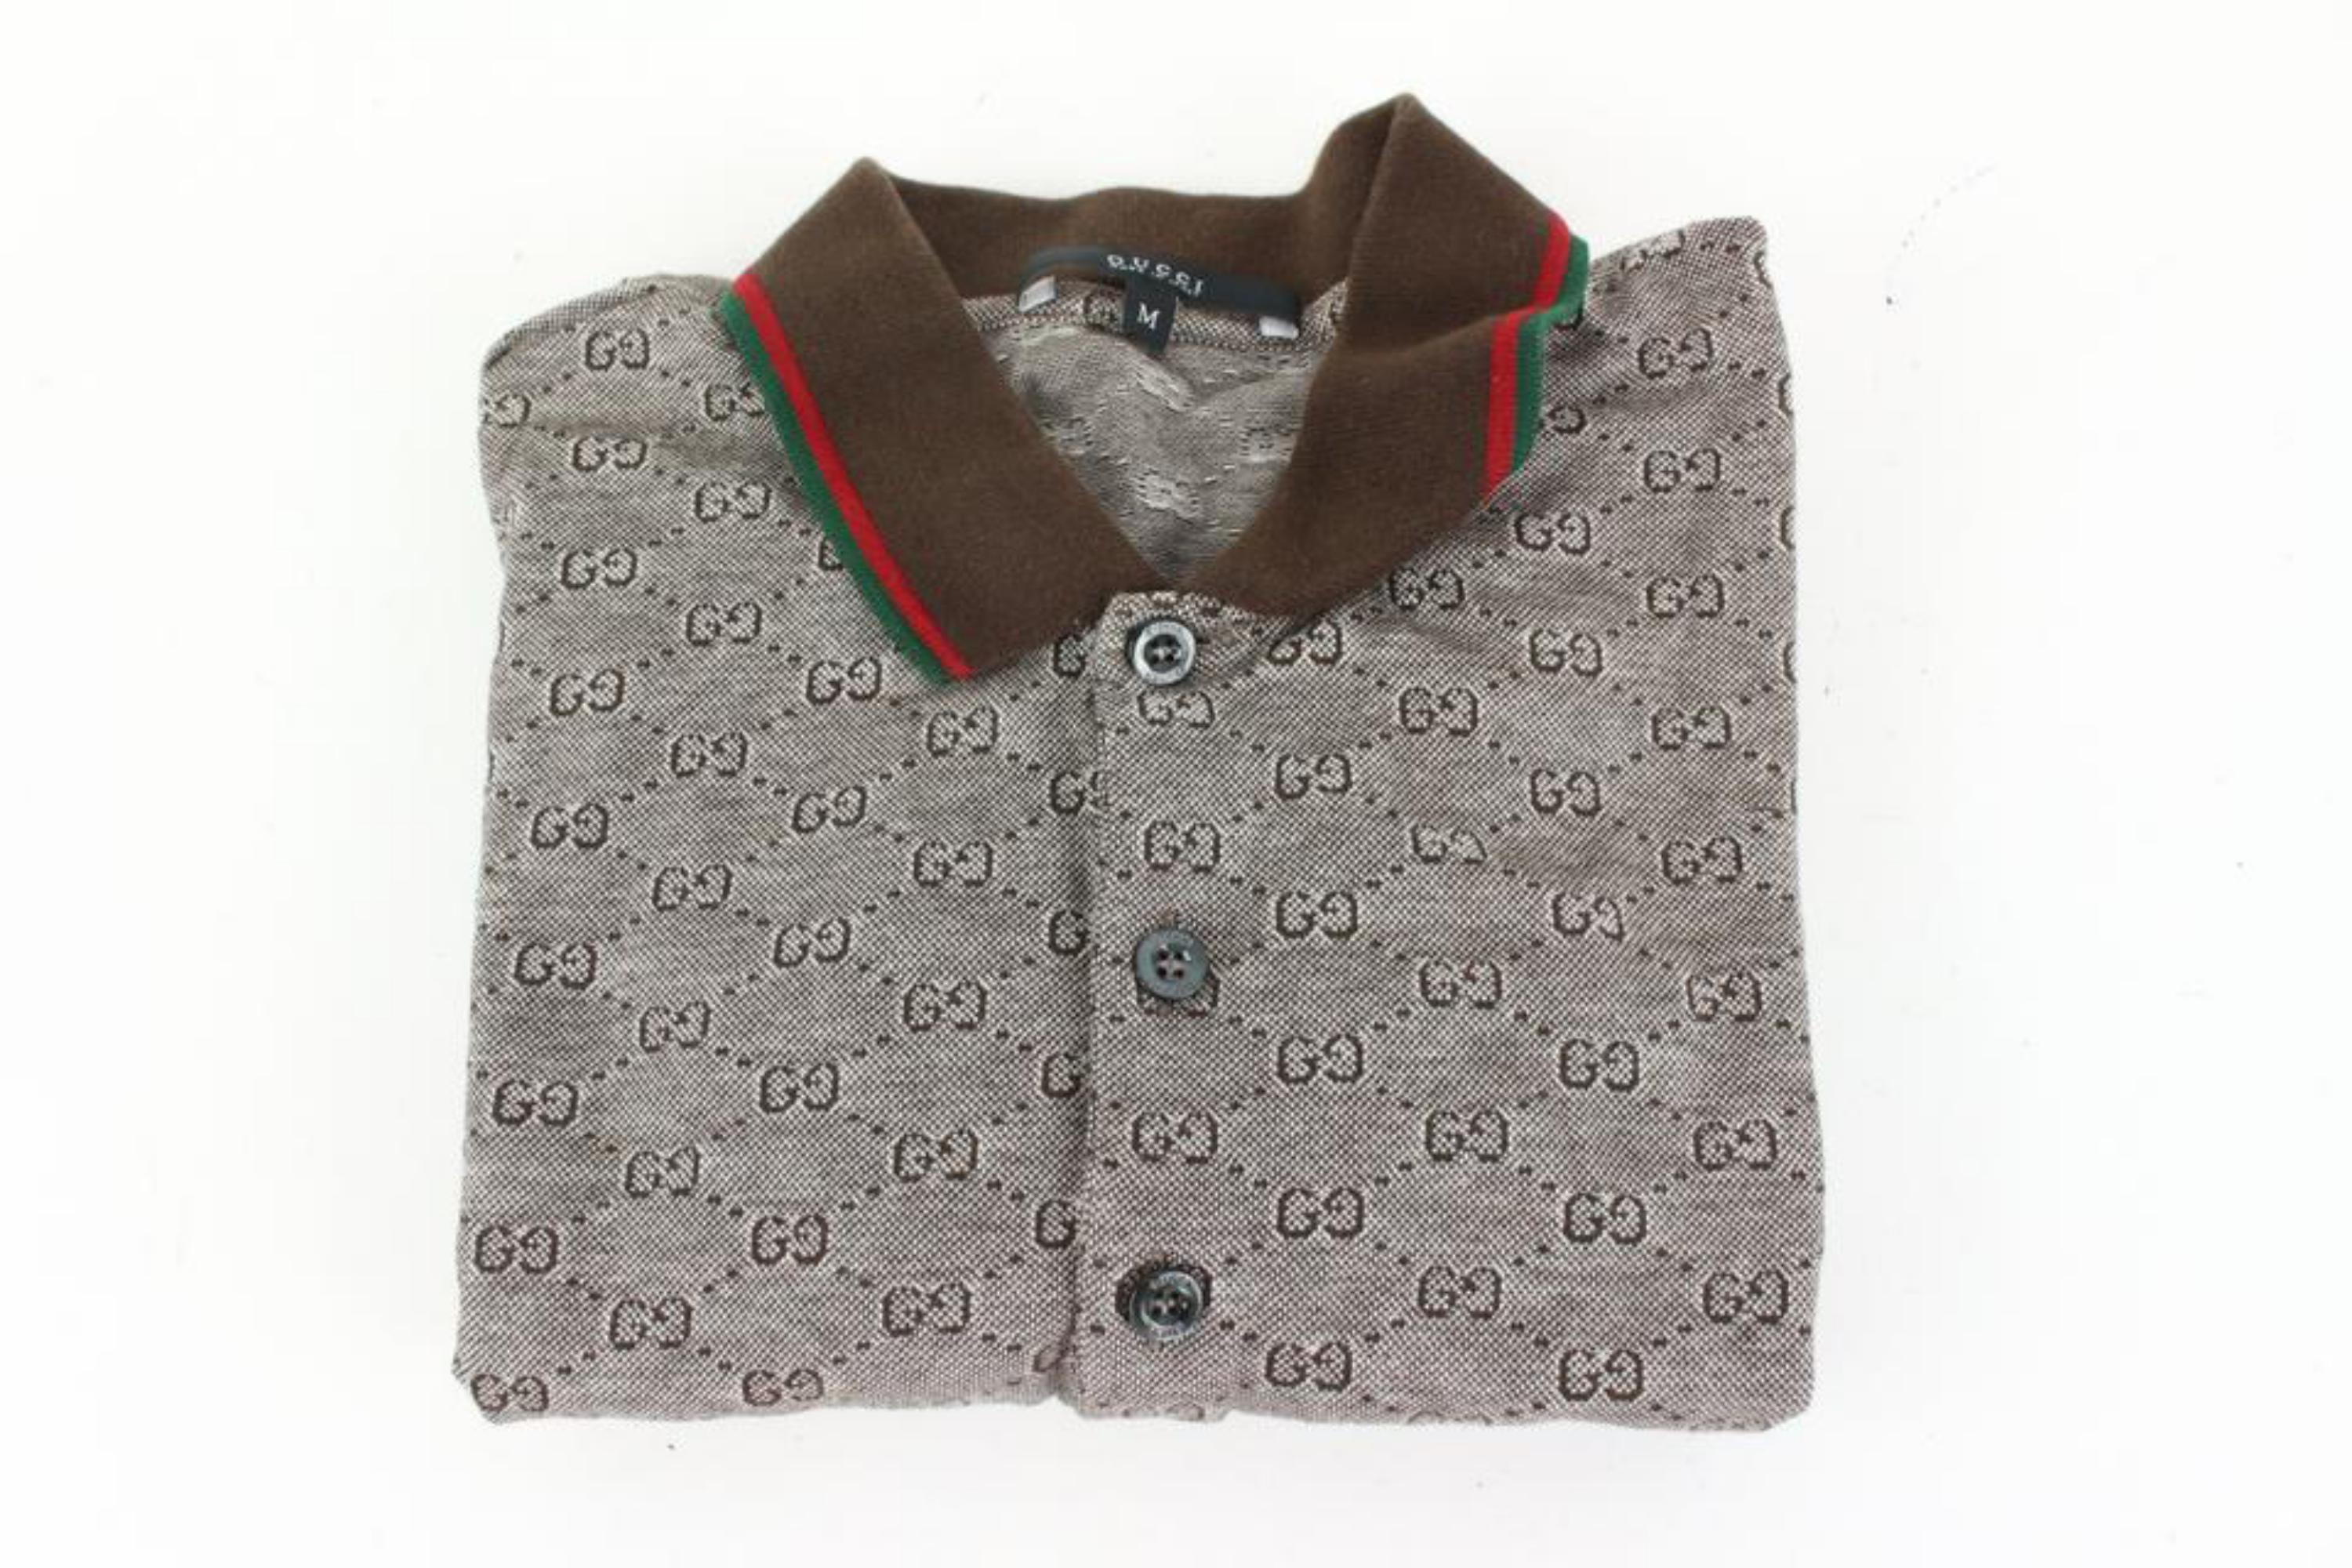 Gucci Men's M Brown Monogram GG Web Collar Polo Shirt Short Sleeve 76g422s
Date Code/Serial Number: 190181-X3235
Made In: Italy
Measurements: Length:  19